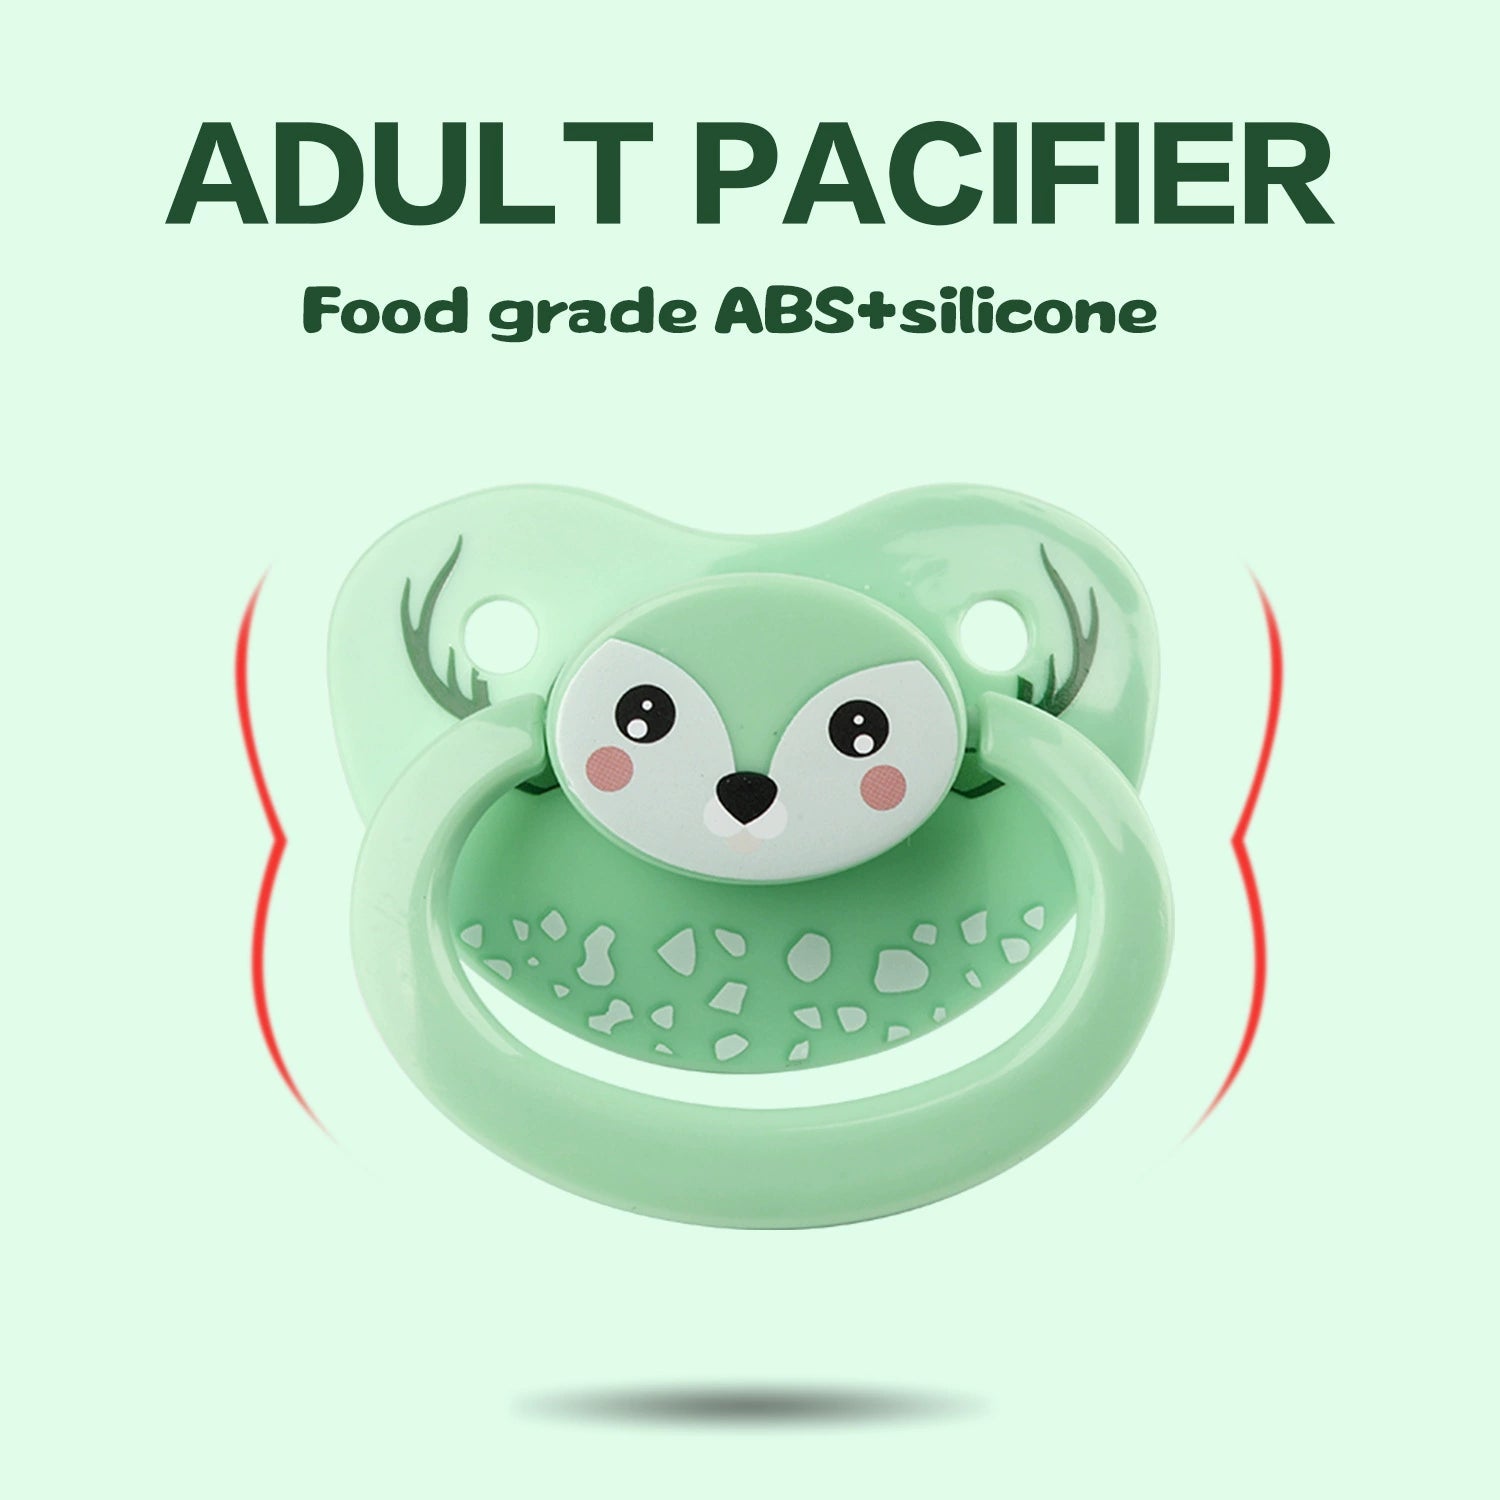 Cute Animal Adult Pacifiers (Colors) Puppy's Aesthetics